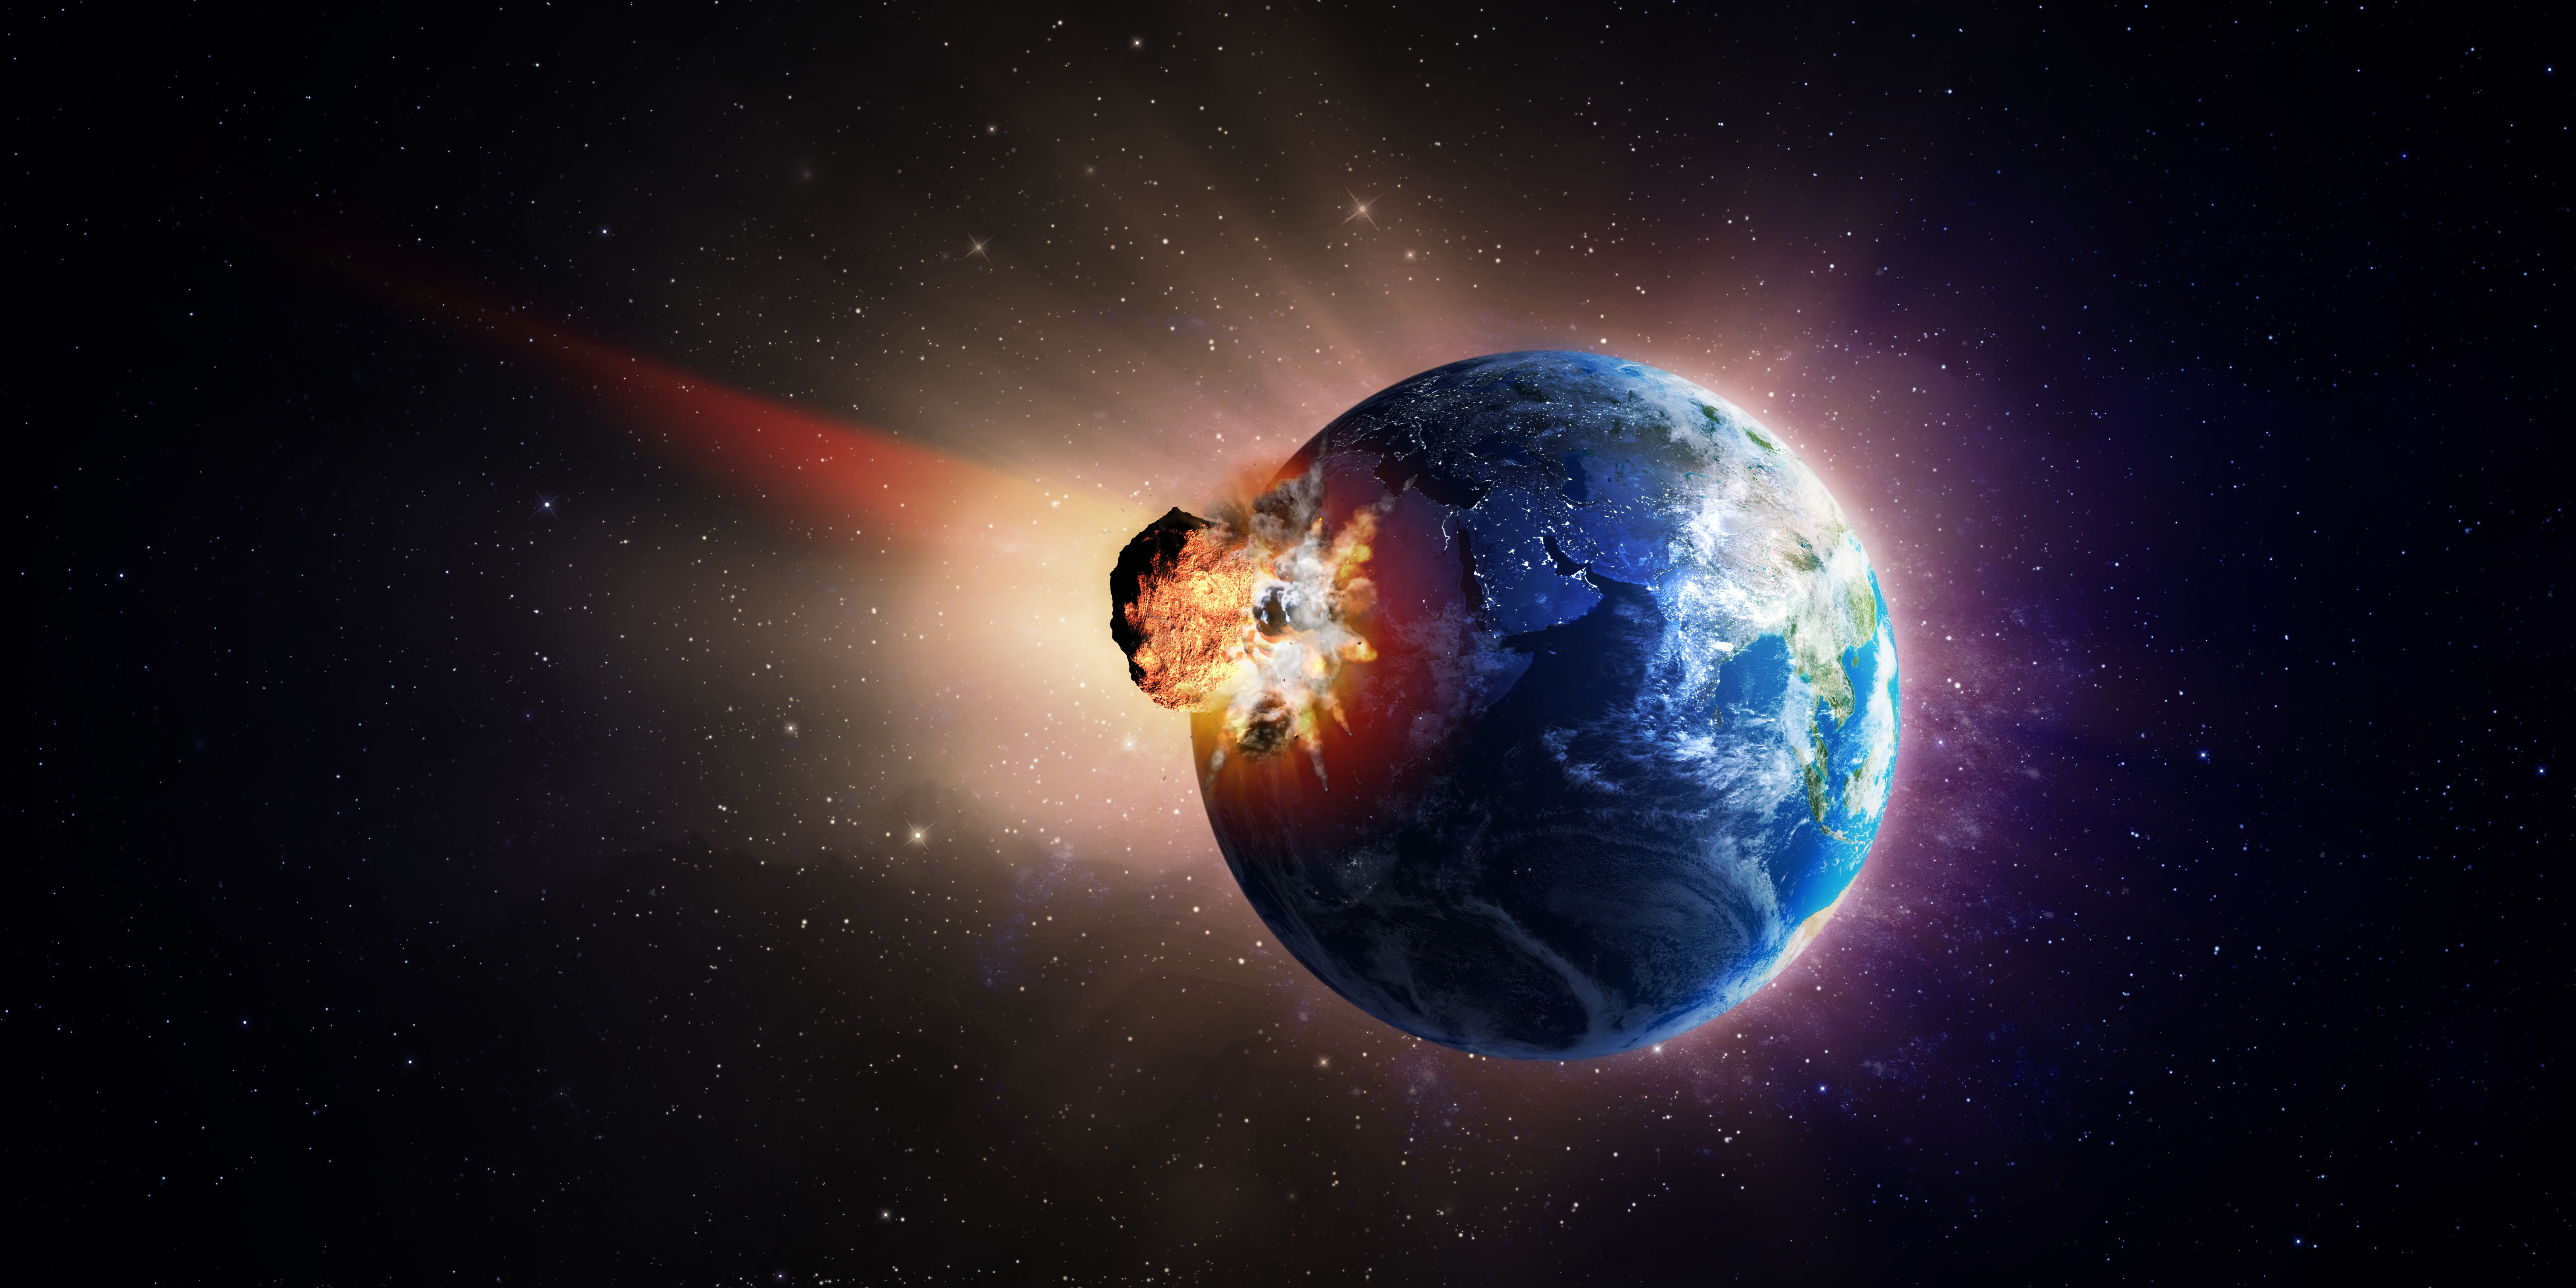 The giant asteroid hit our planet around 13,000 years ago